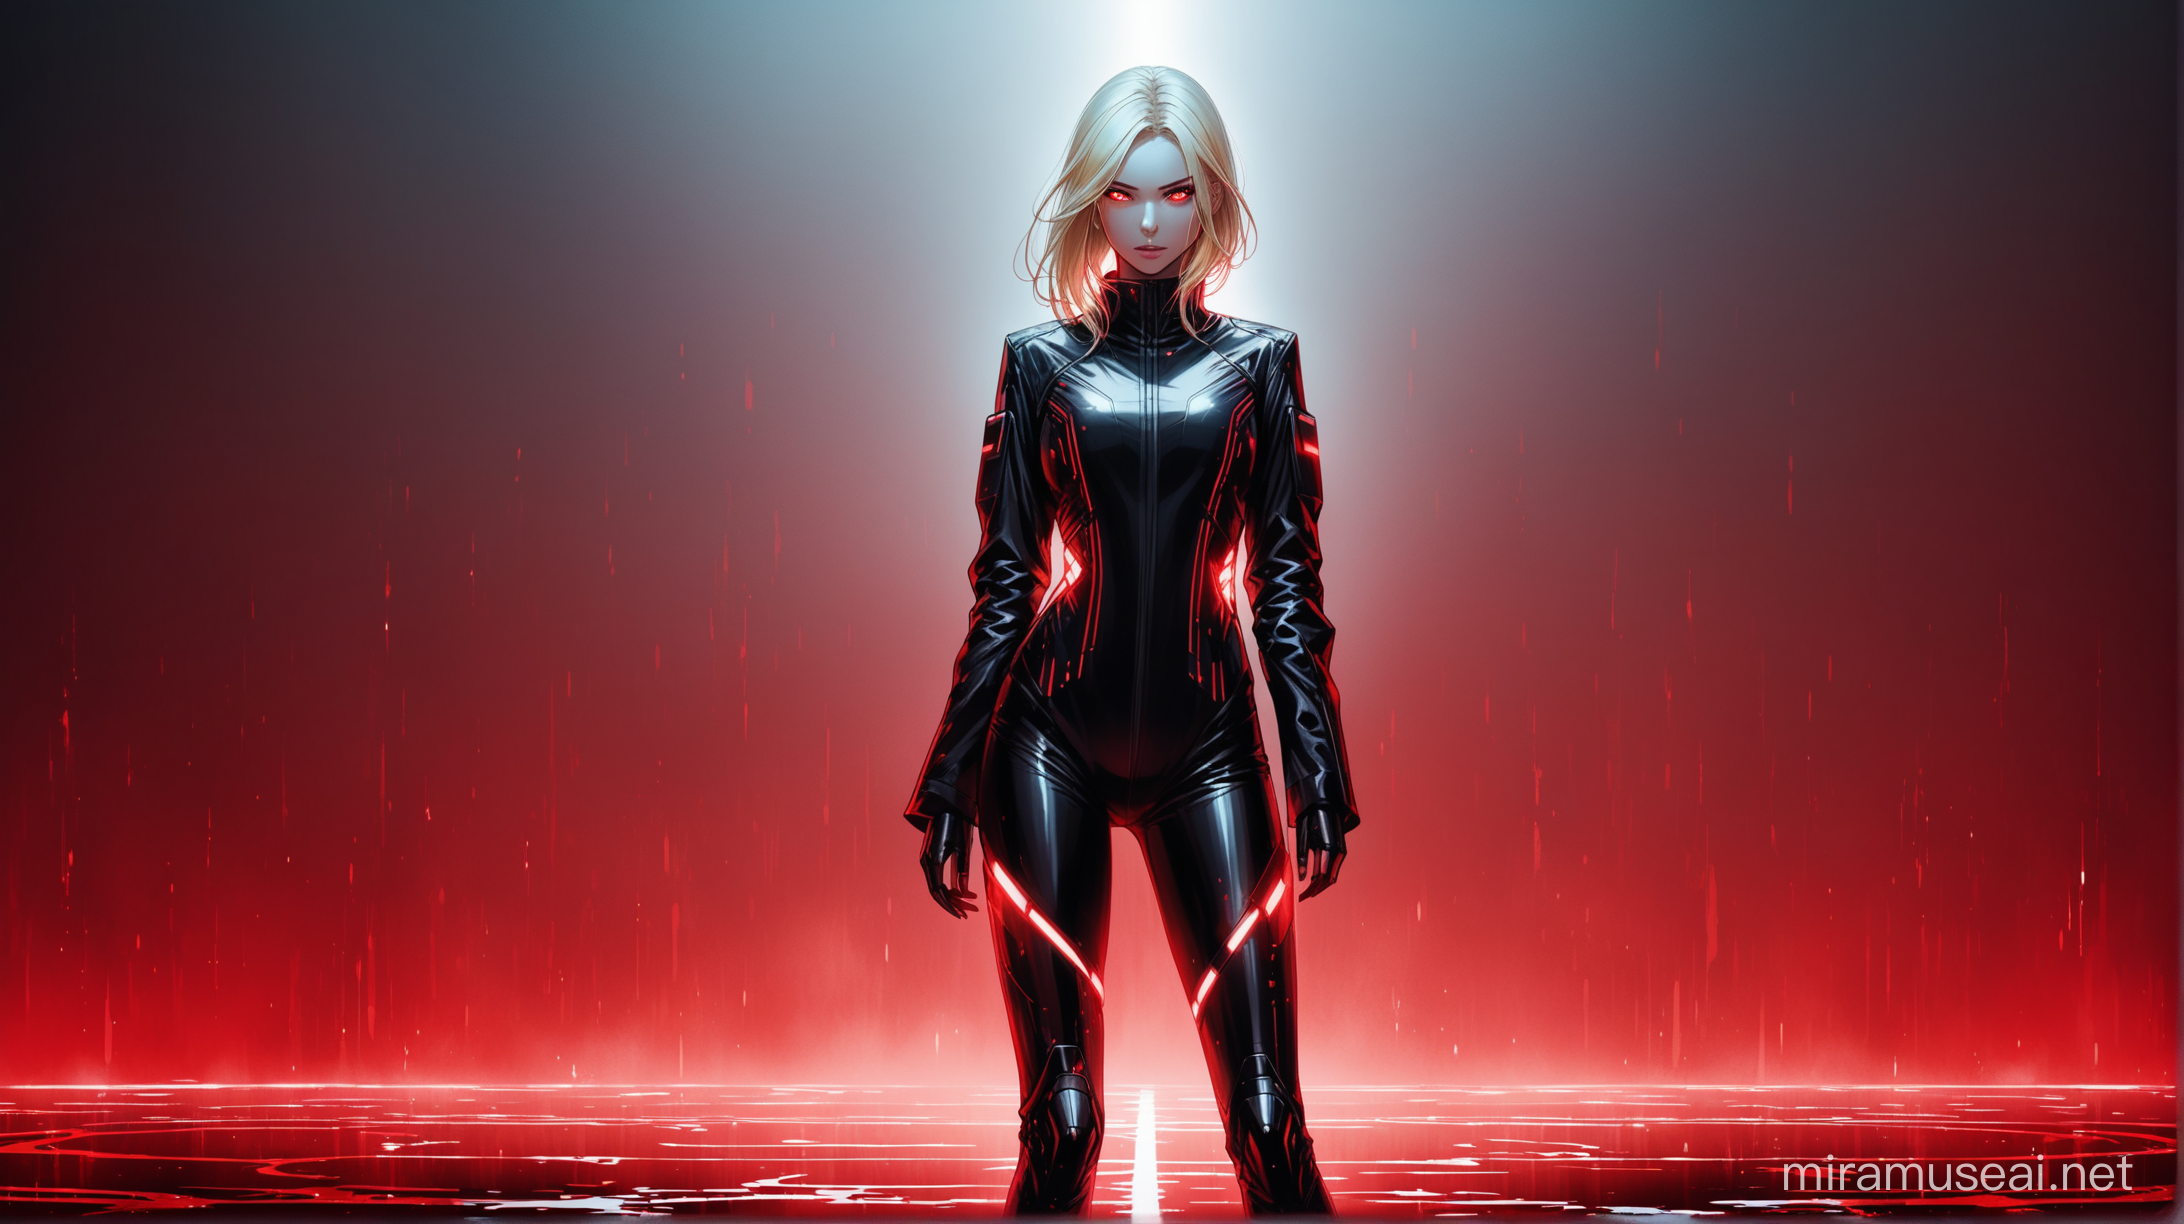 Futuristic Femme Fatale Stylish Woman in Noir Setting with Eerie Red Accents